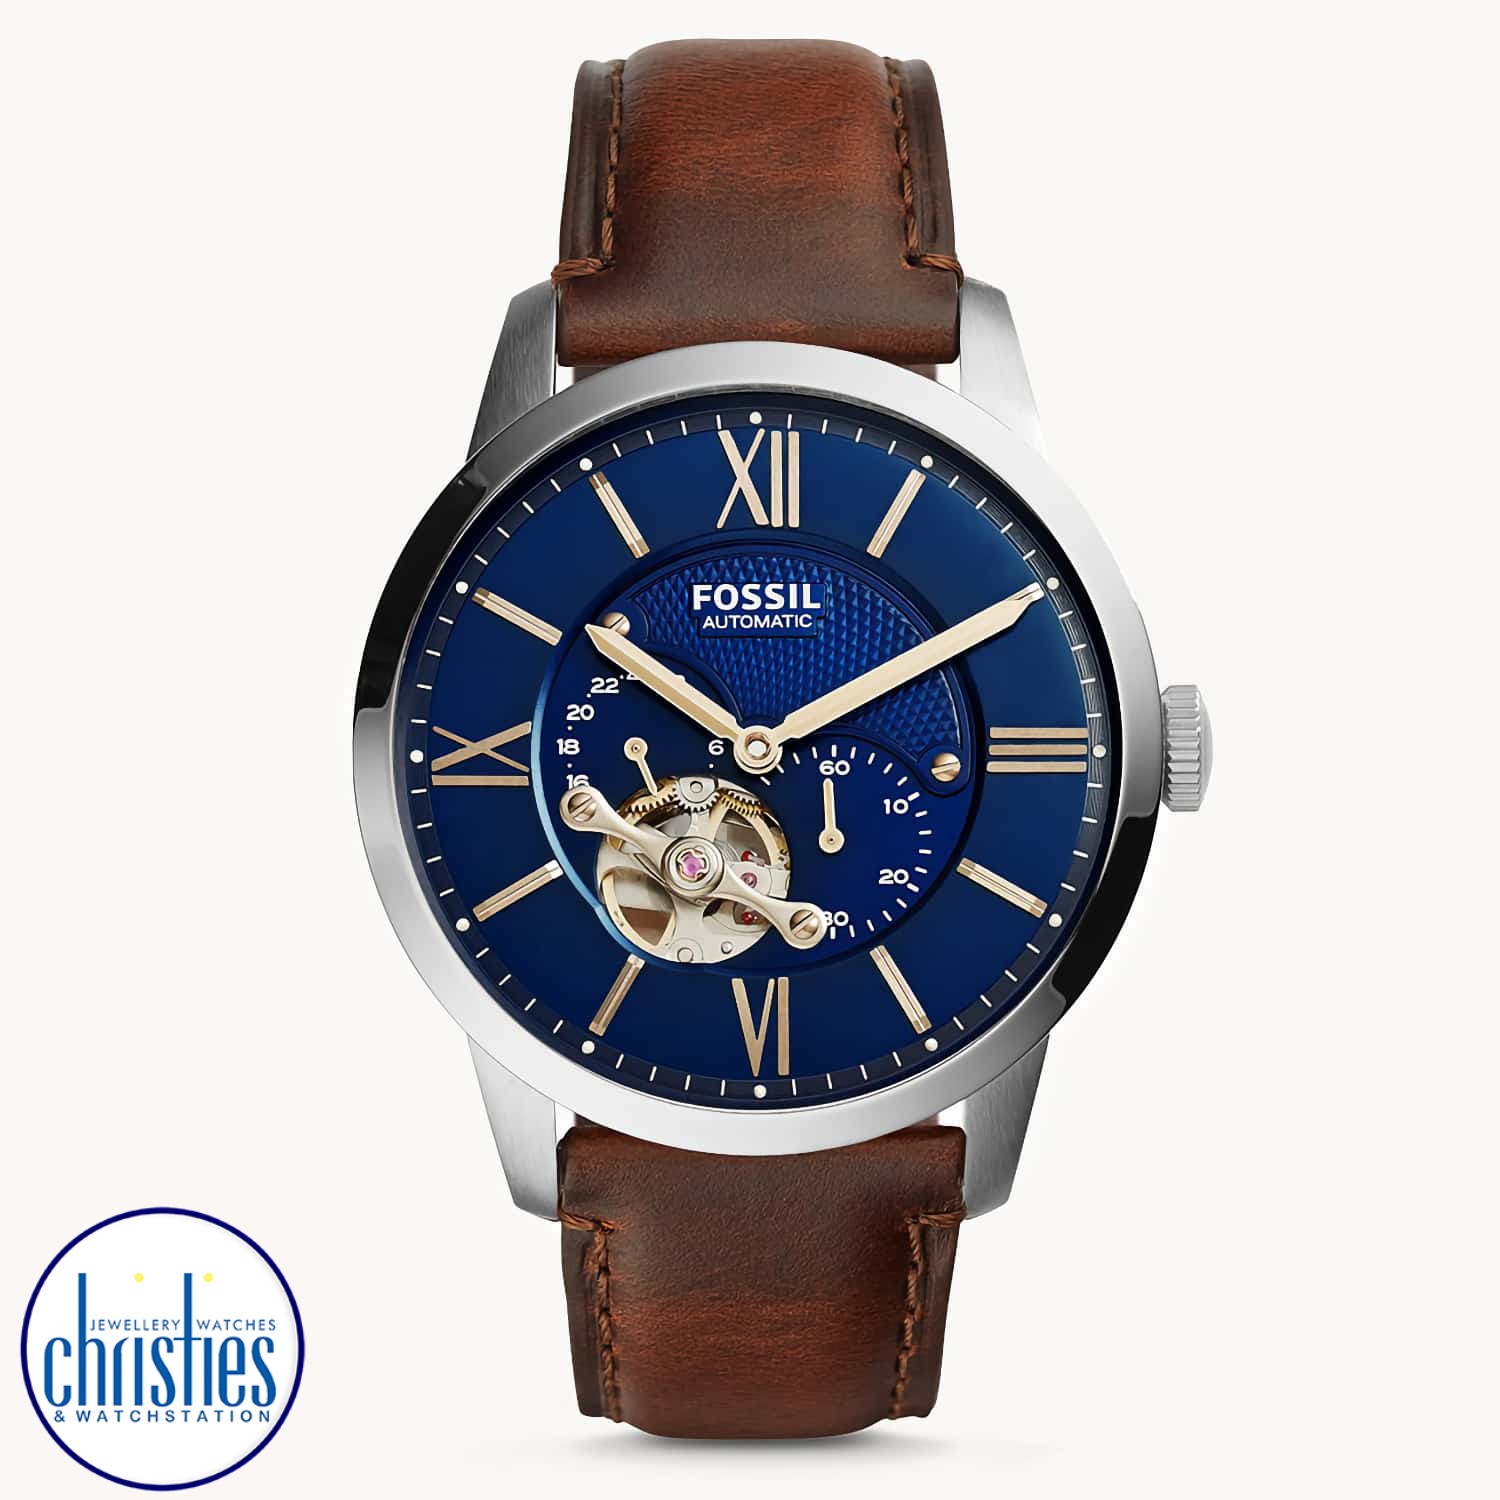 ME3110 Fossil Townsman Automatic Brown Leather Watch. ME3110 Fossil Nate Chronograph Black Stainless Steel Watch Afterpay - Split your purchase into 4 instalments - Pay for your purchase over 4 instalments, due every two weeks. You’ll pay your first insta